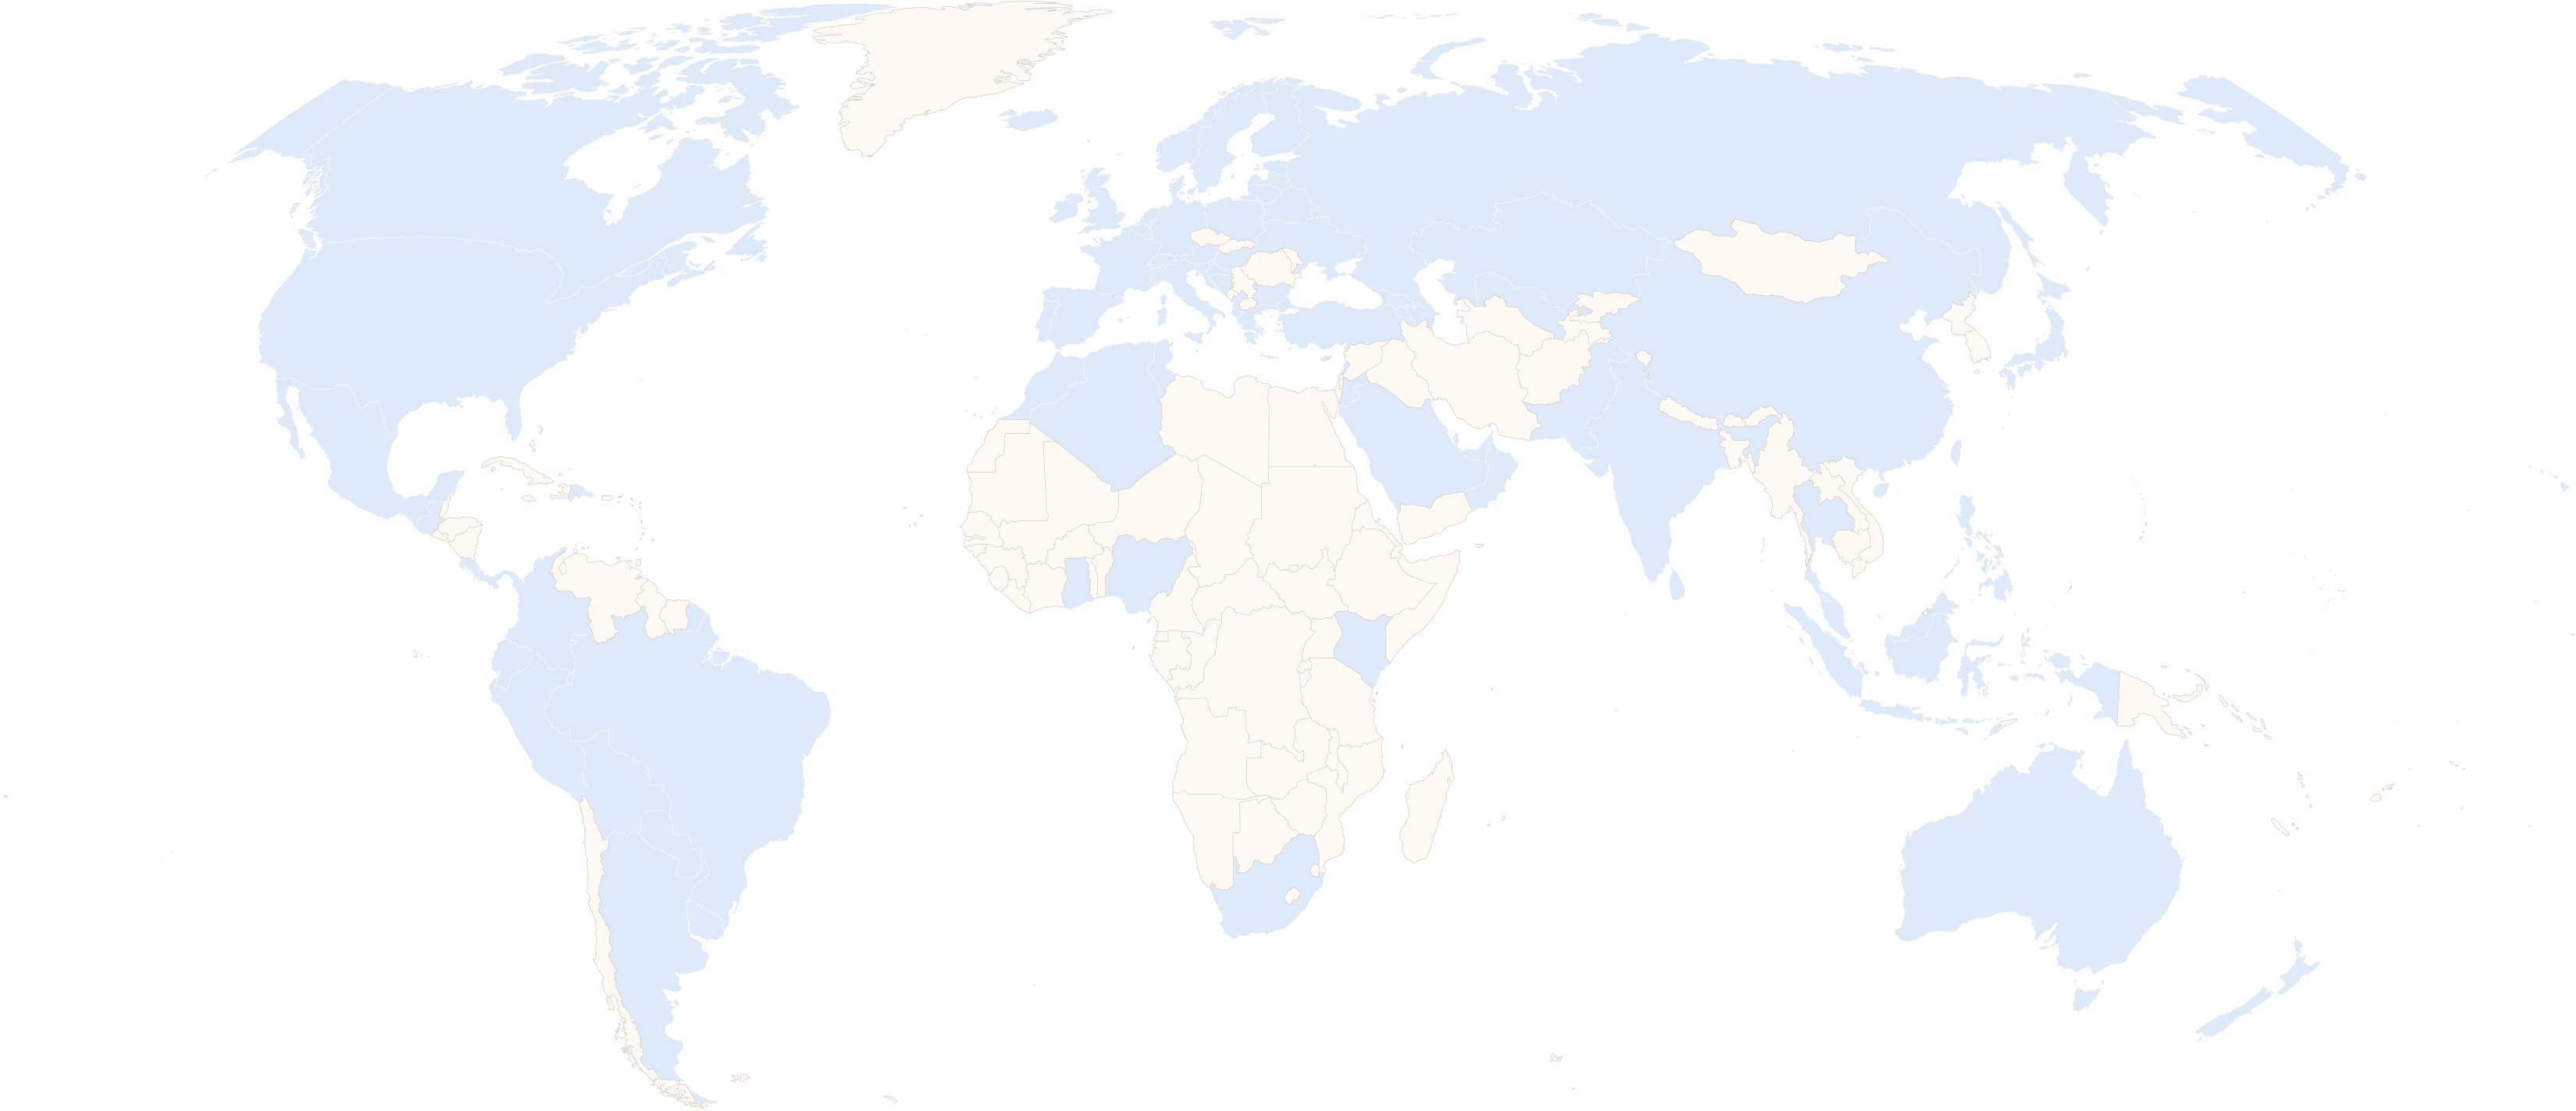 90+ countries comprising the PRME community